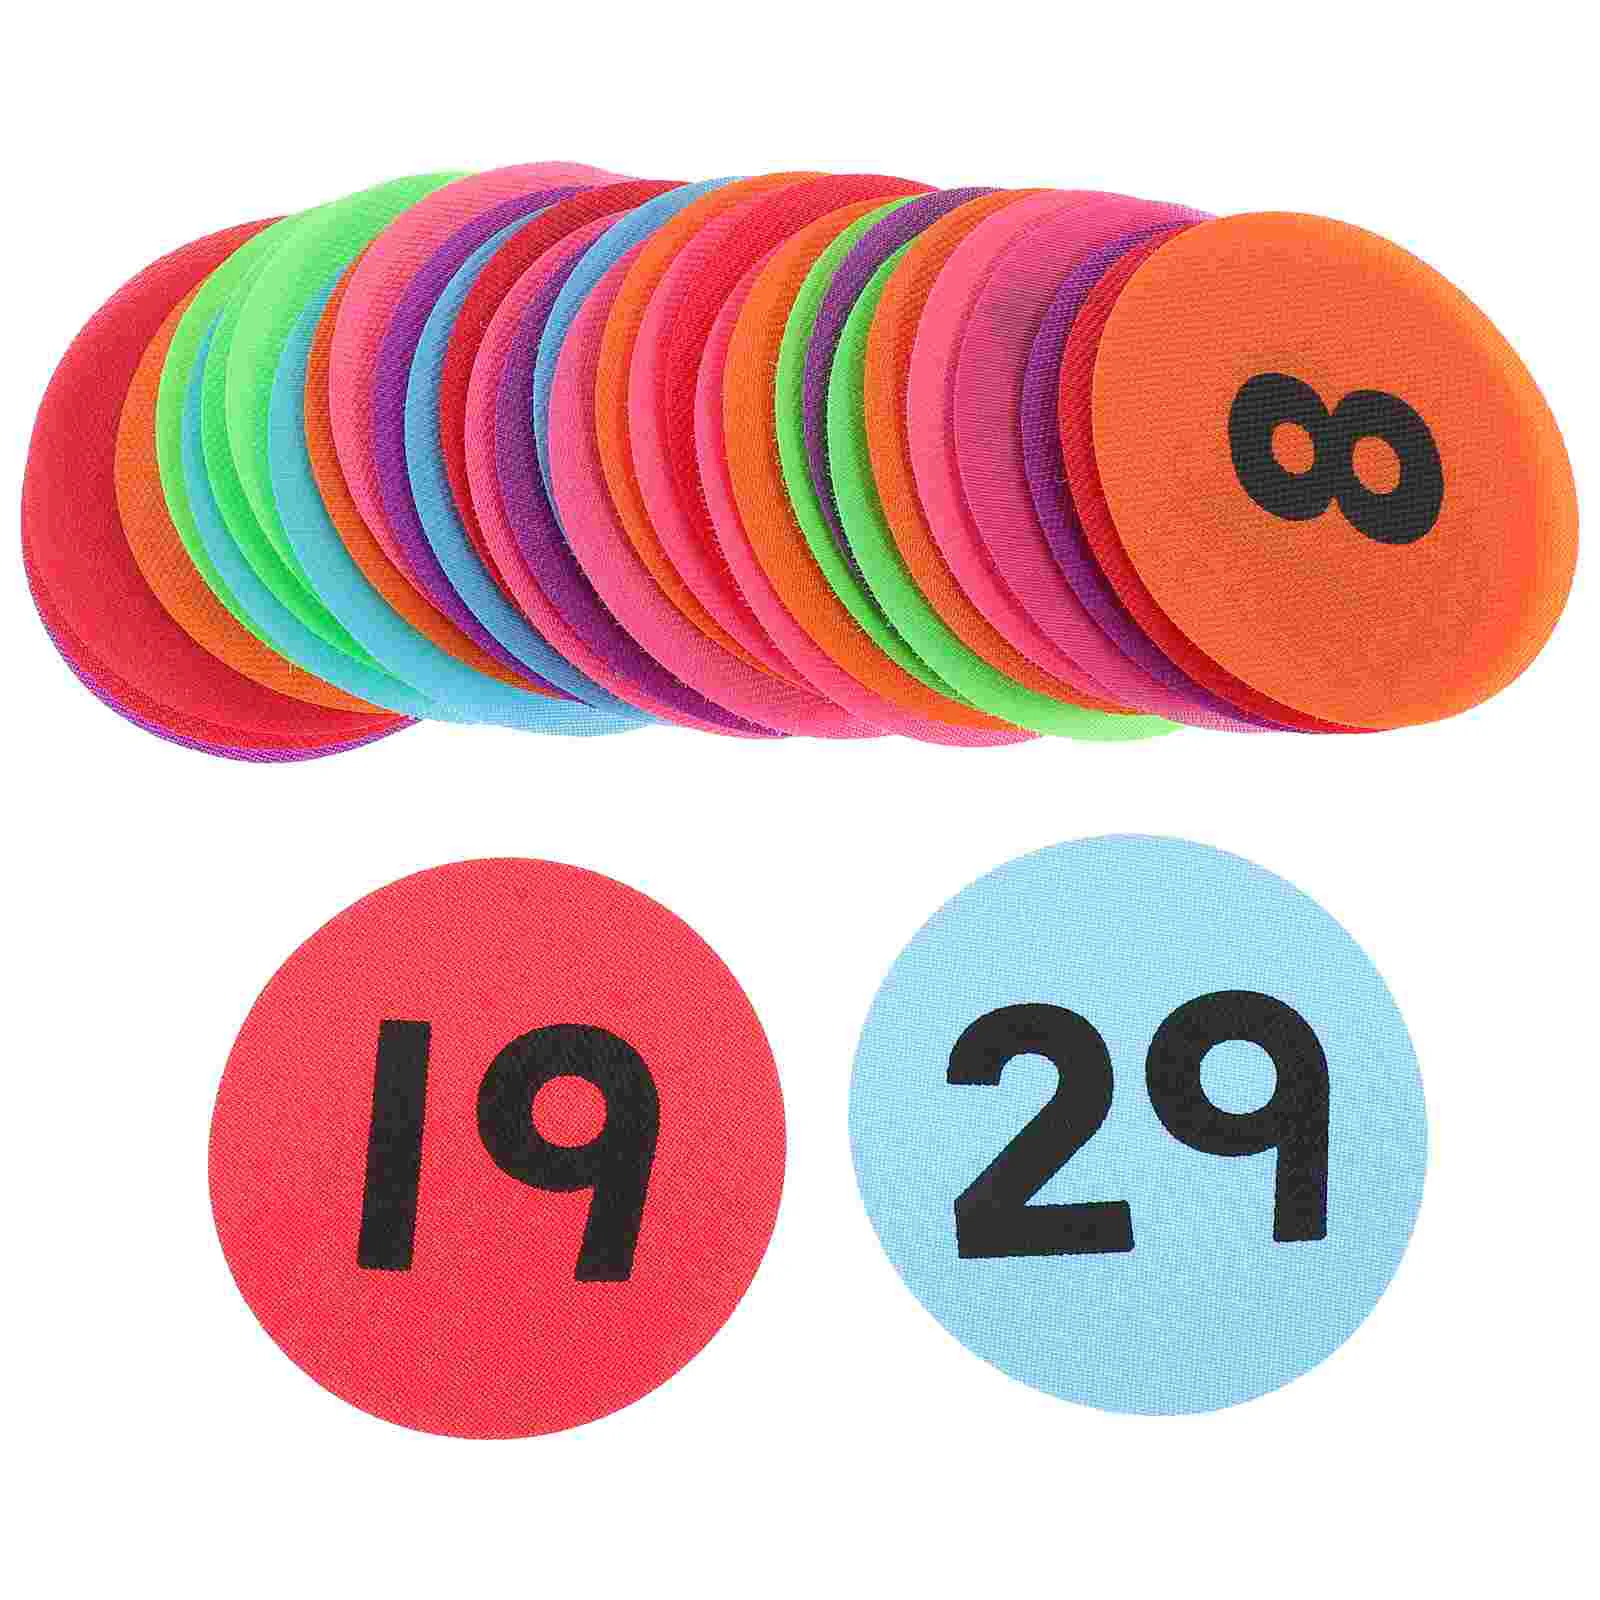 36pcs Numbers Stickers Self-adhesive Number Labels Colored Number Stickers Home Office Identification Labels